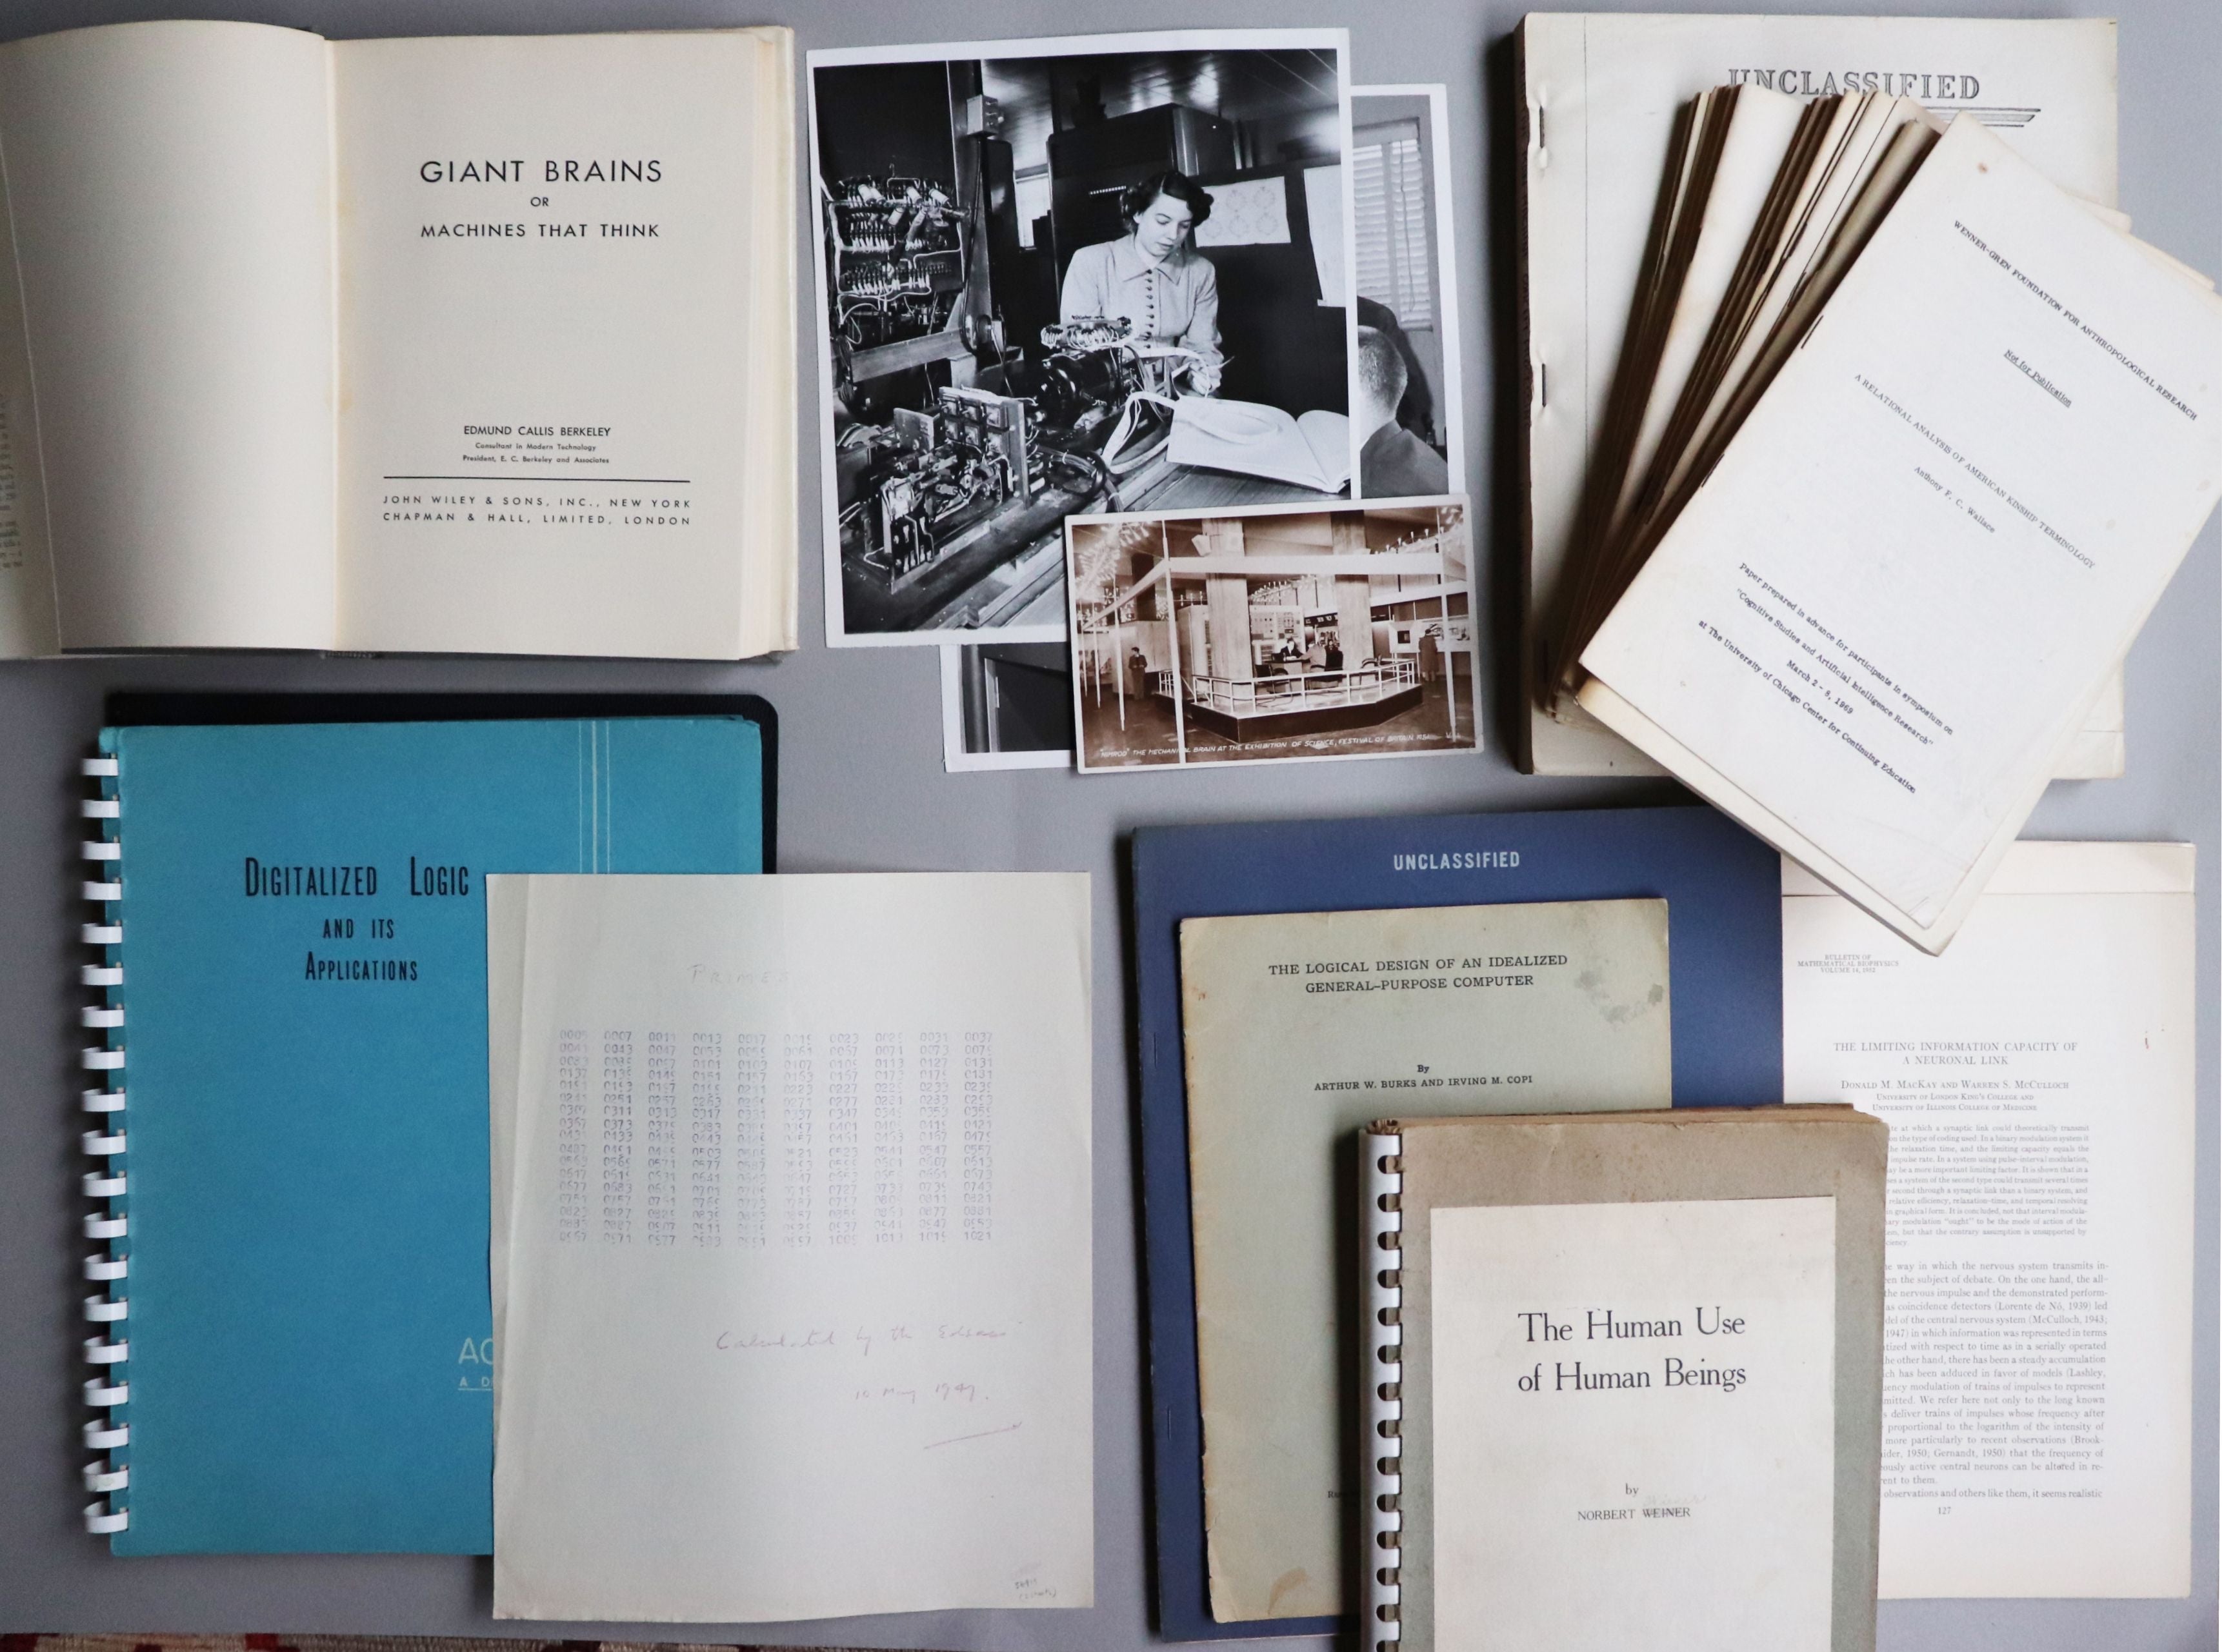 A full scope of the papers, books, and photos in Christian White's collection. (Photo: New York International Antiquarian Book Fair)